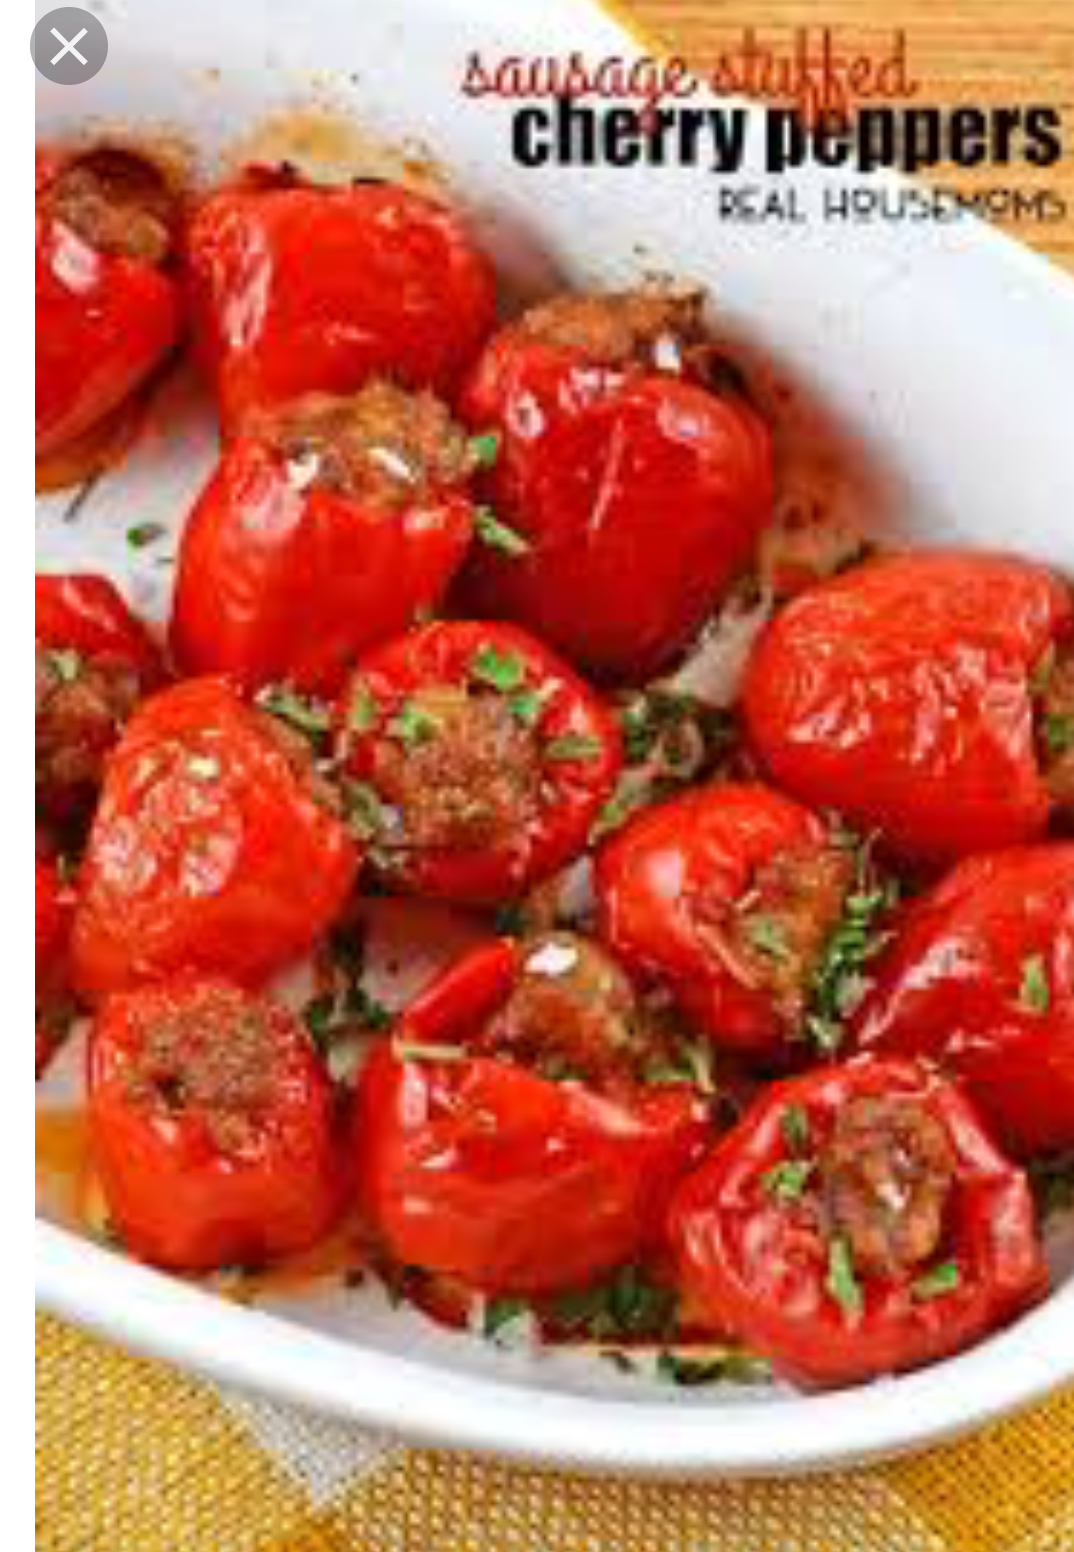 Stuffed Cherry Peppers image